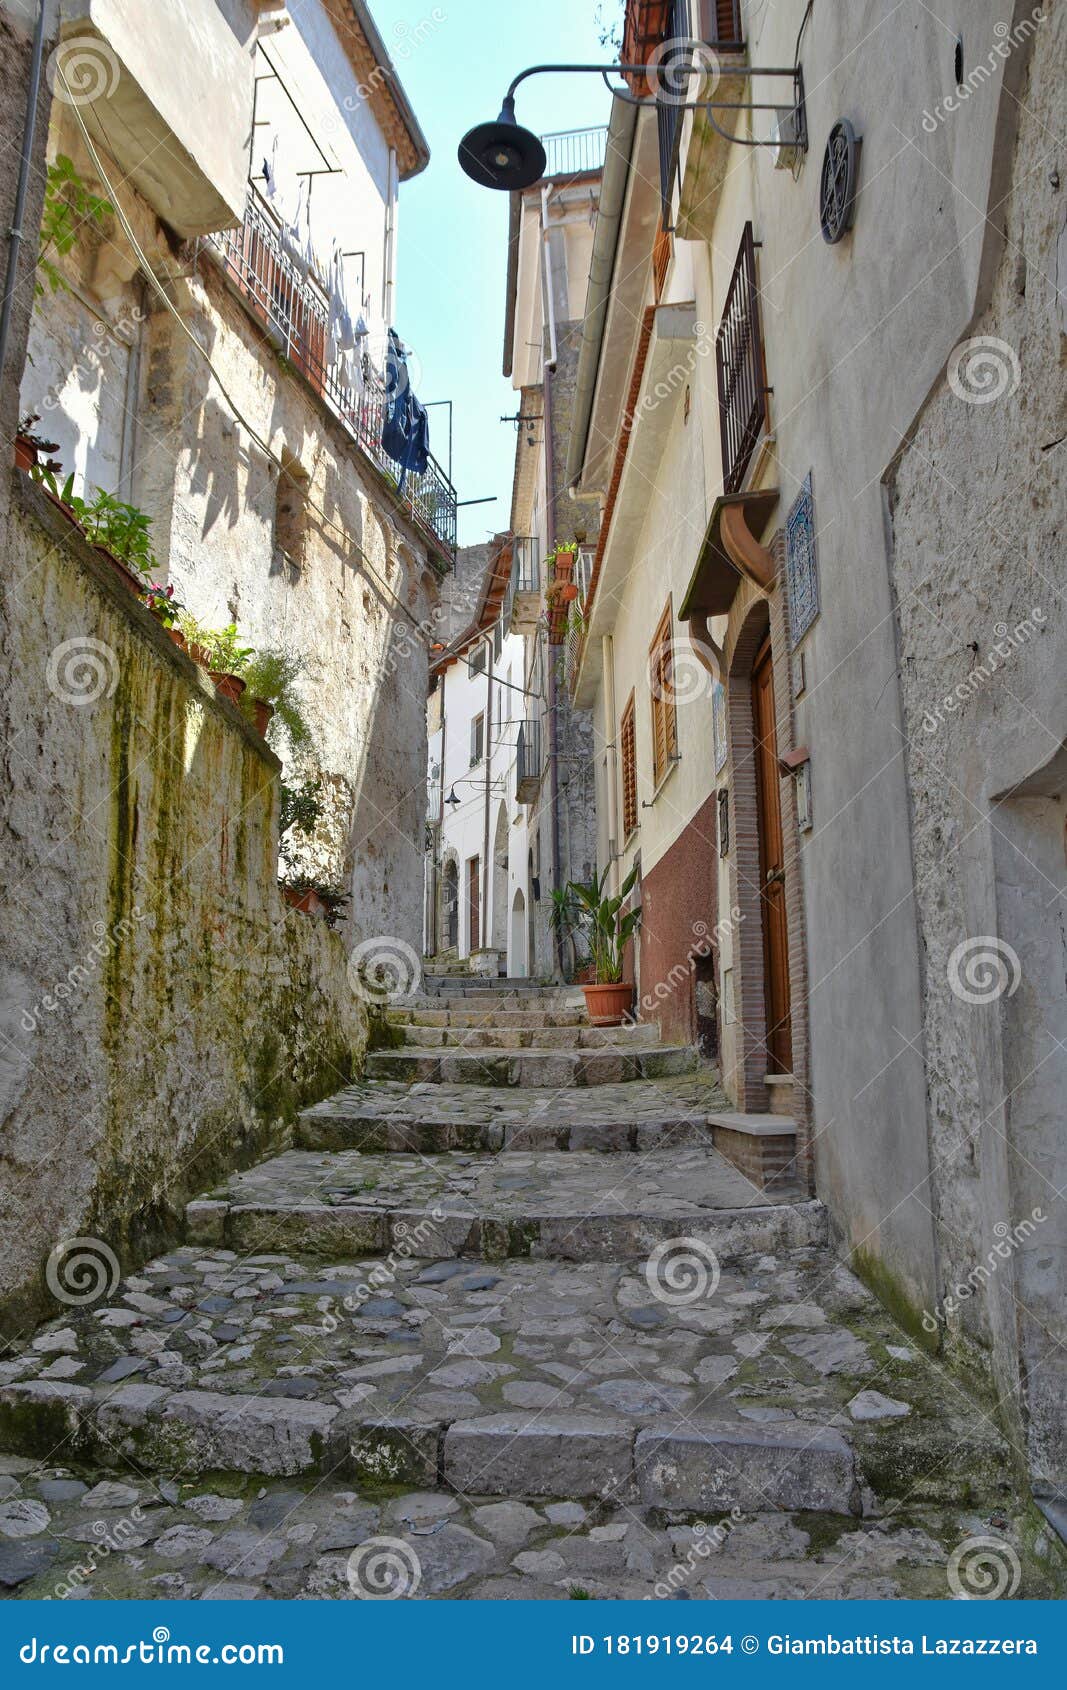 the architecture of the old town of itri in the lazio region, italy.